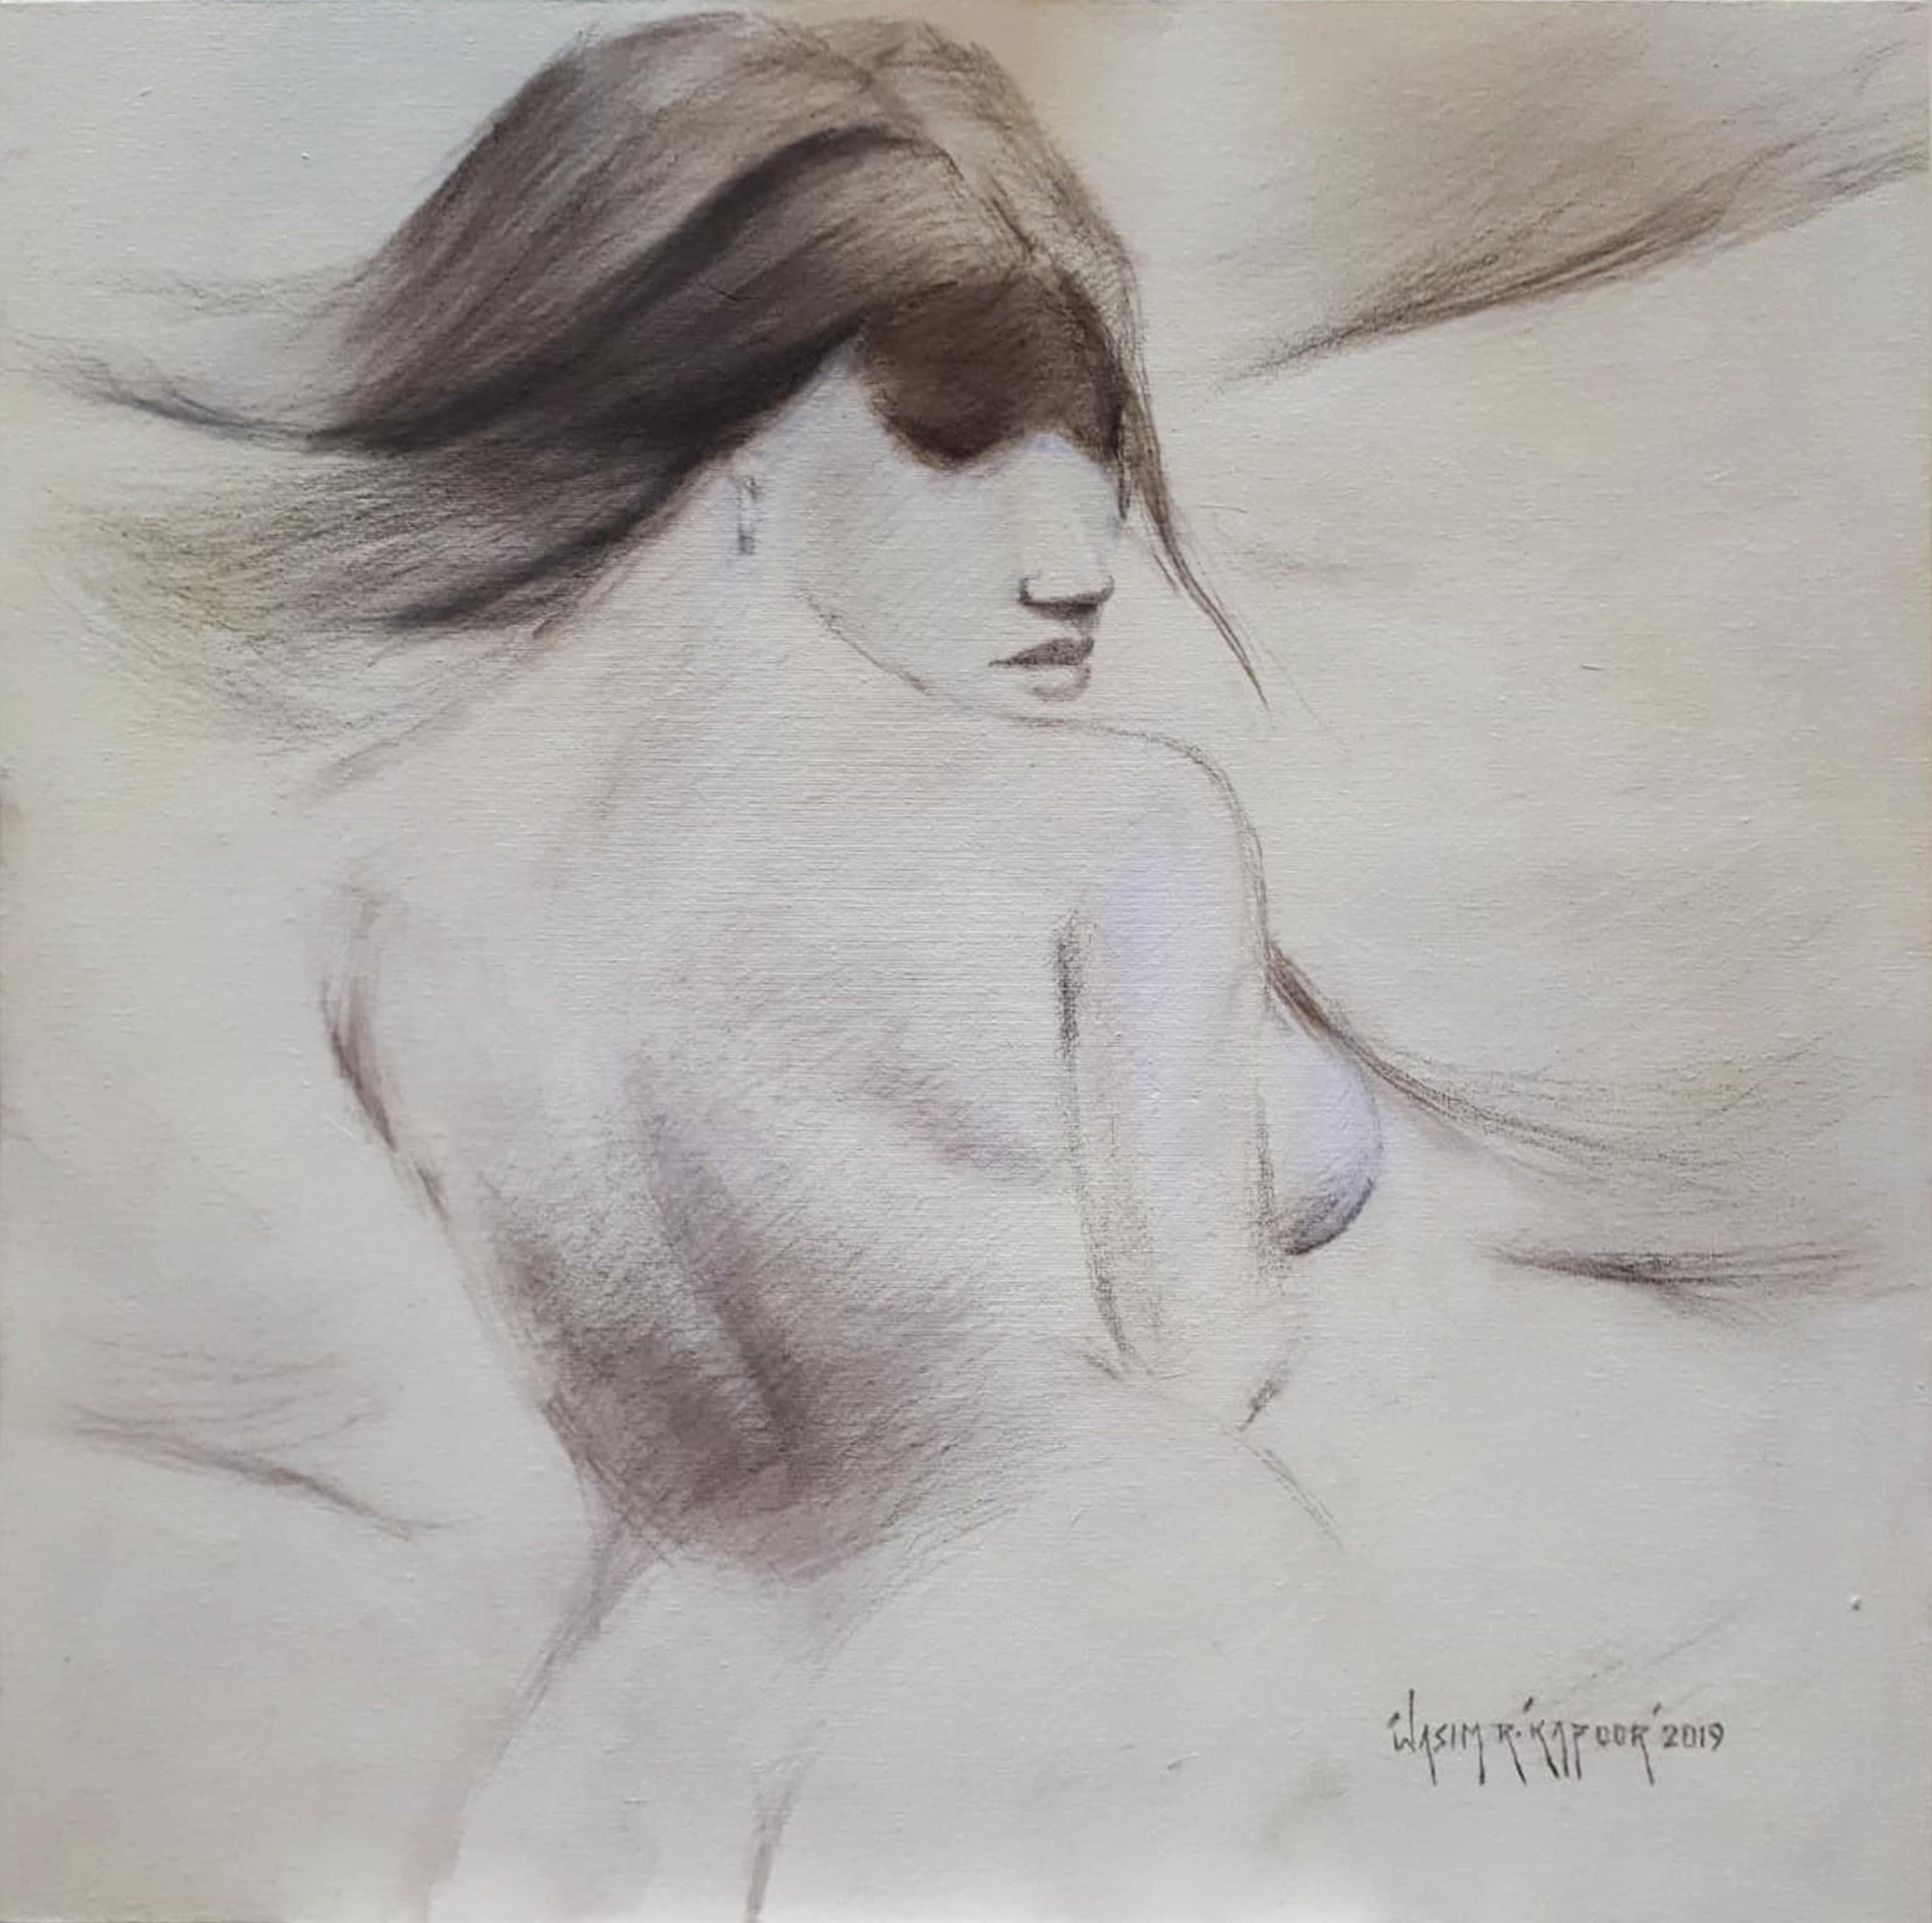 Wasim Kapoor Nude Painting - Woman, Nude, Drawng, Conte on Canvas, Brown by Indian Artist "In Stock"